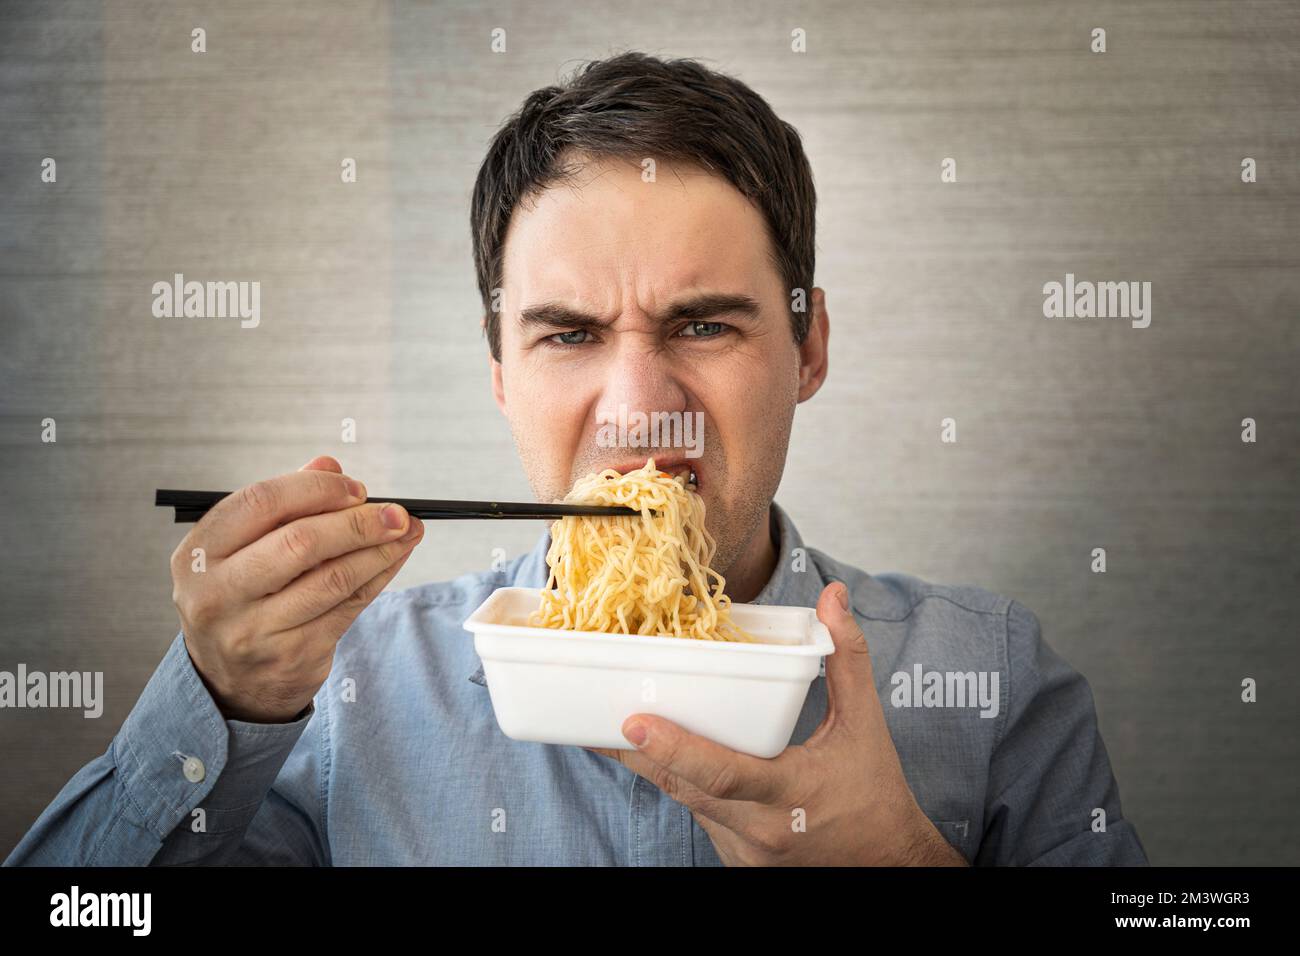 Young man eating instant noodles while working with in office. Lunch at the office. tasteless junk food Stock Photo